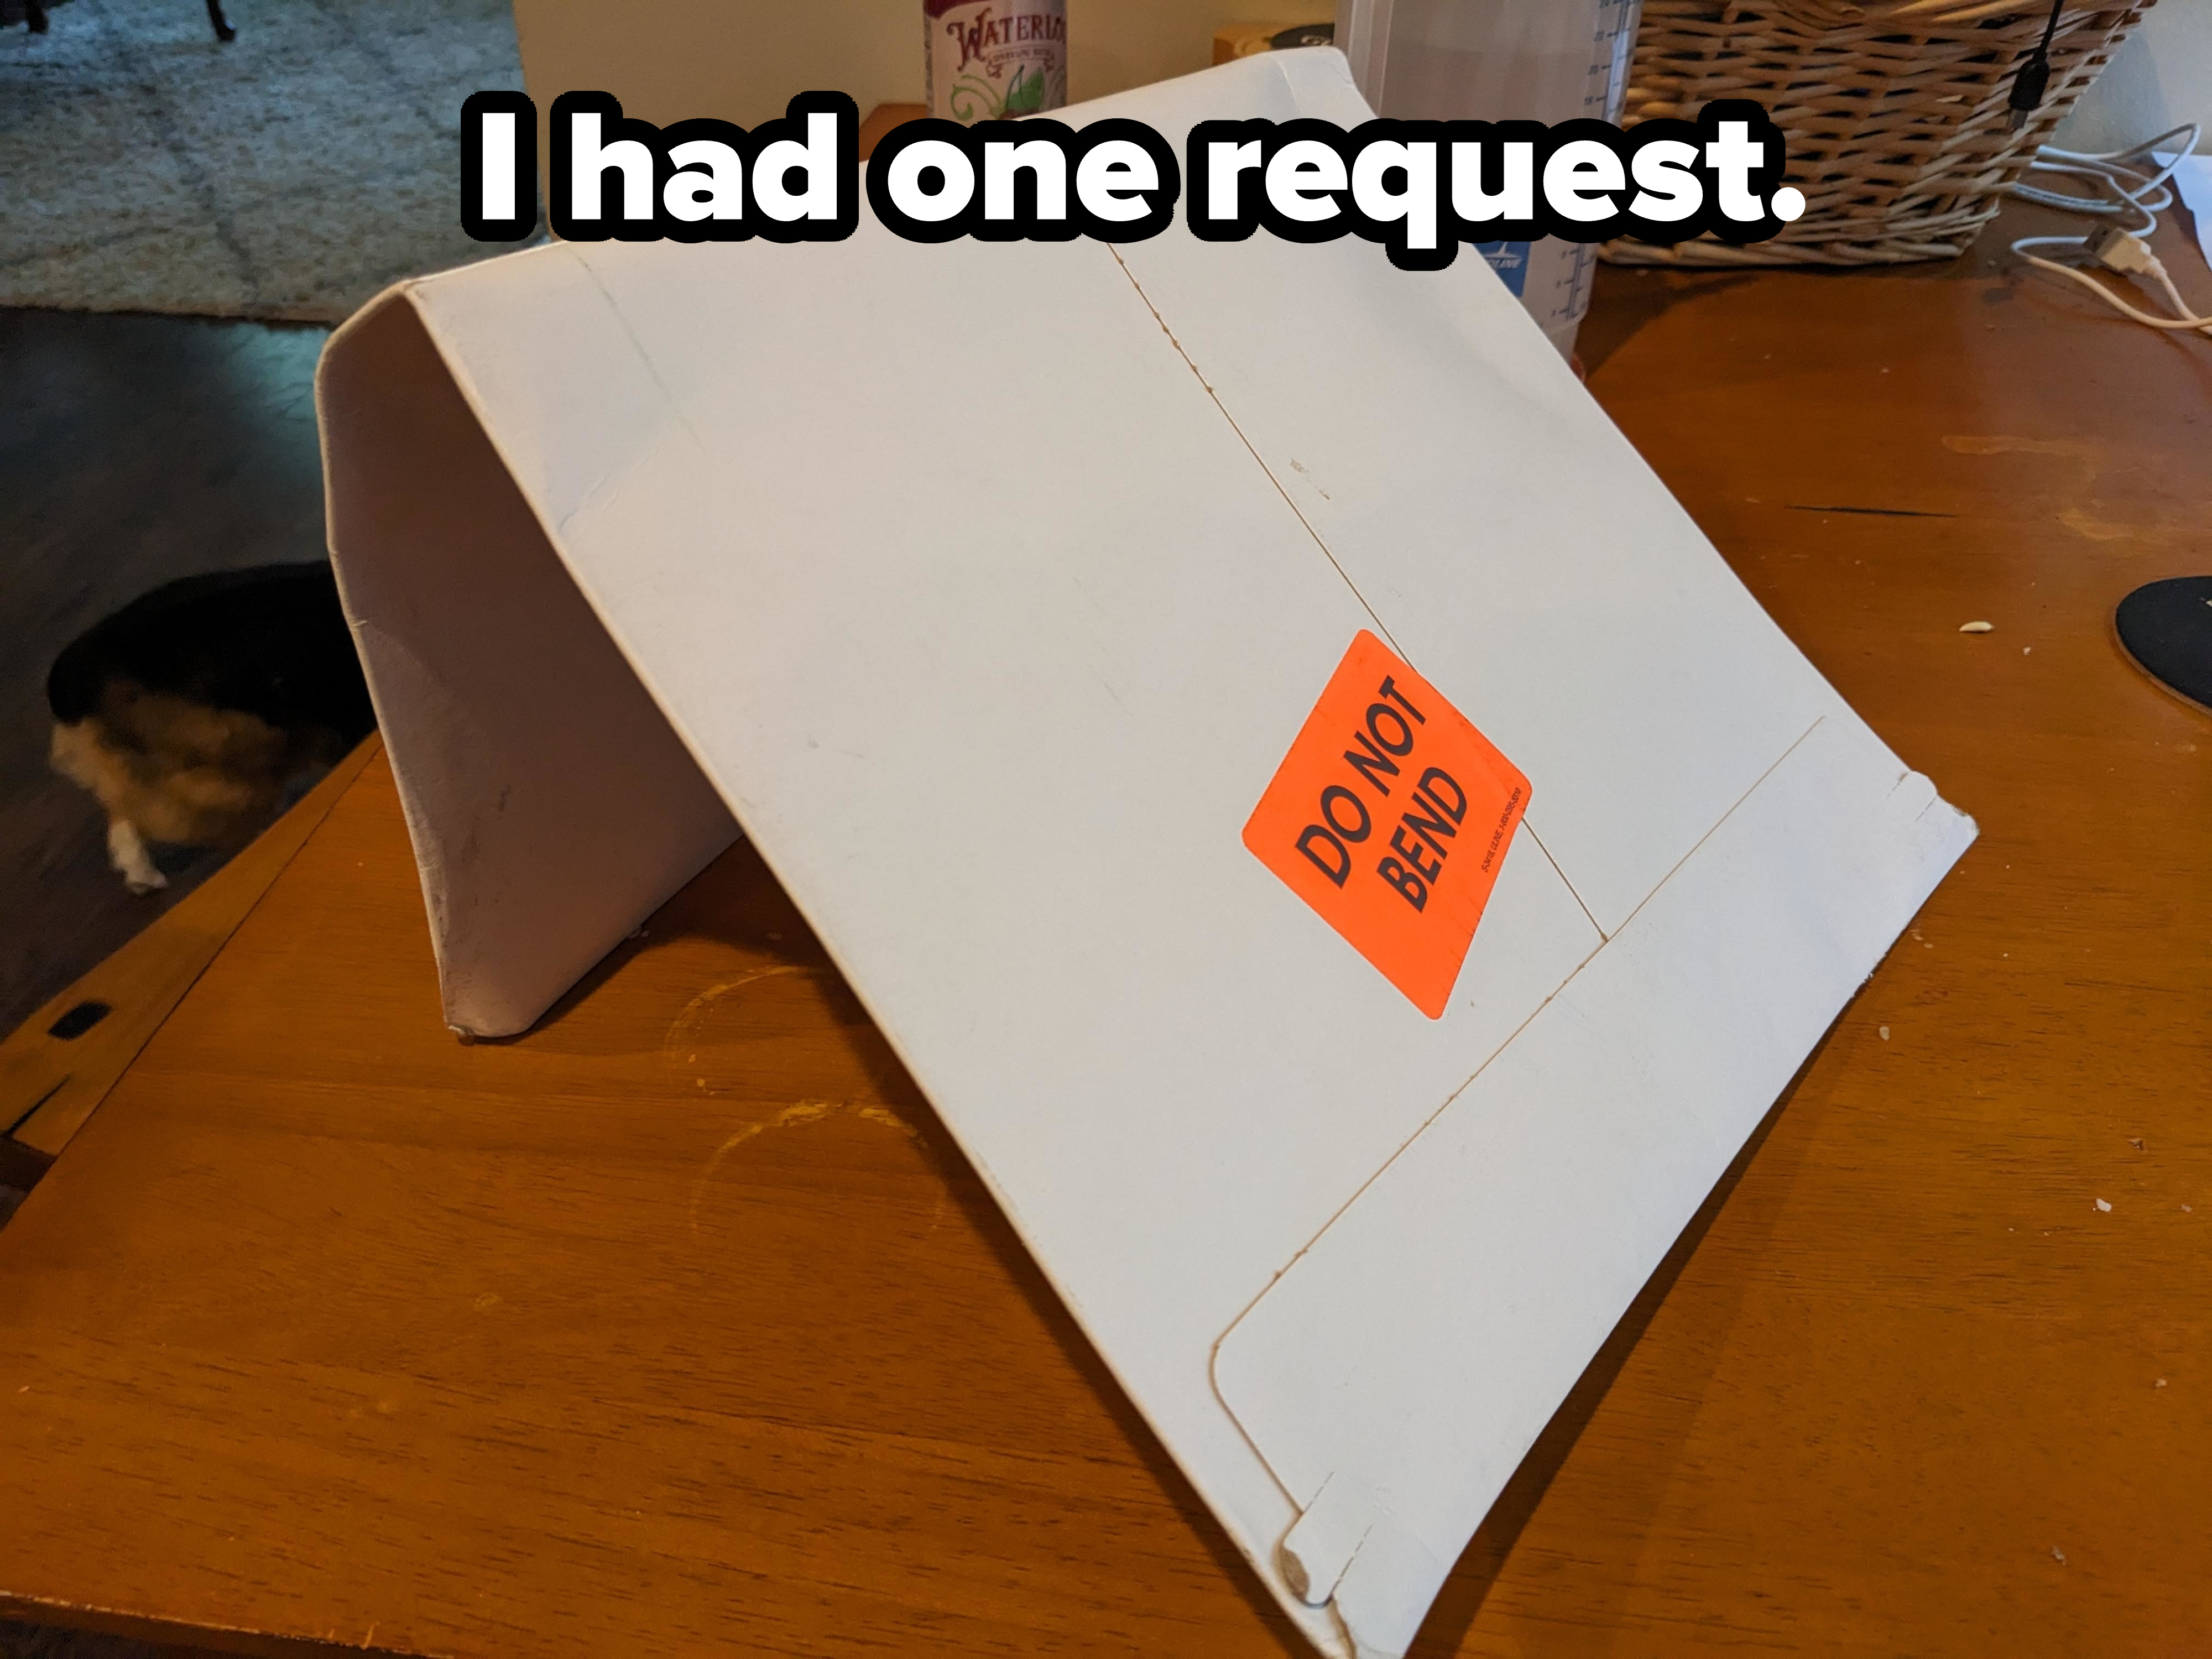 A cardboard envelope with a &quot;DO NOT BEND&quot; label rests on a table